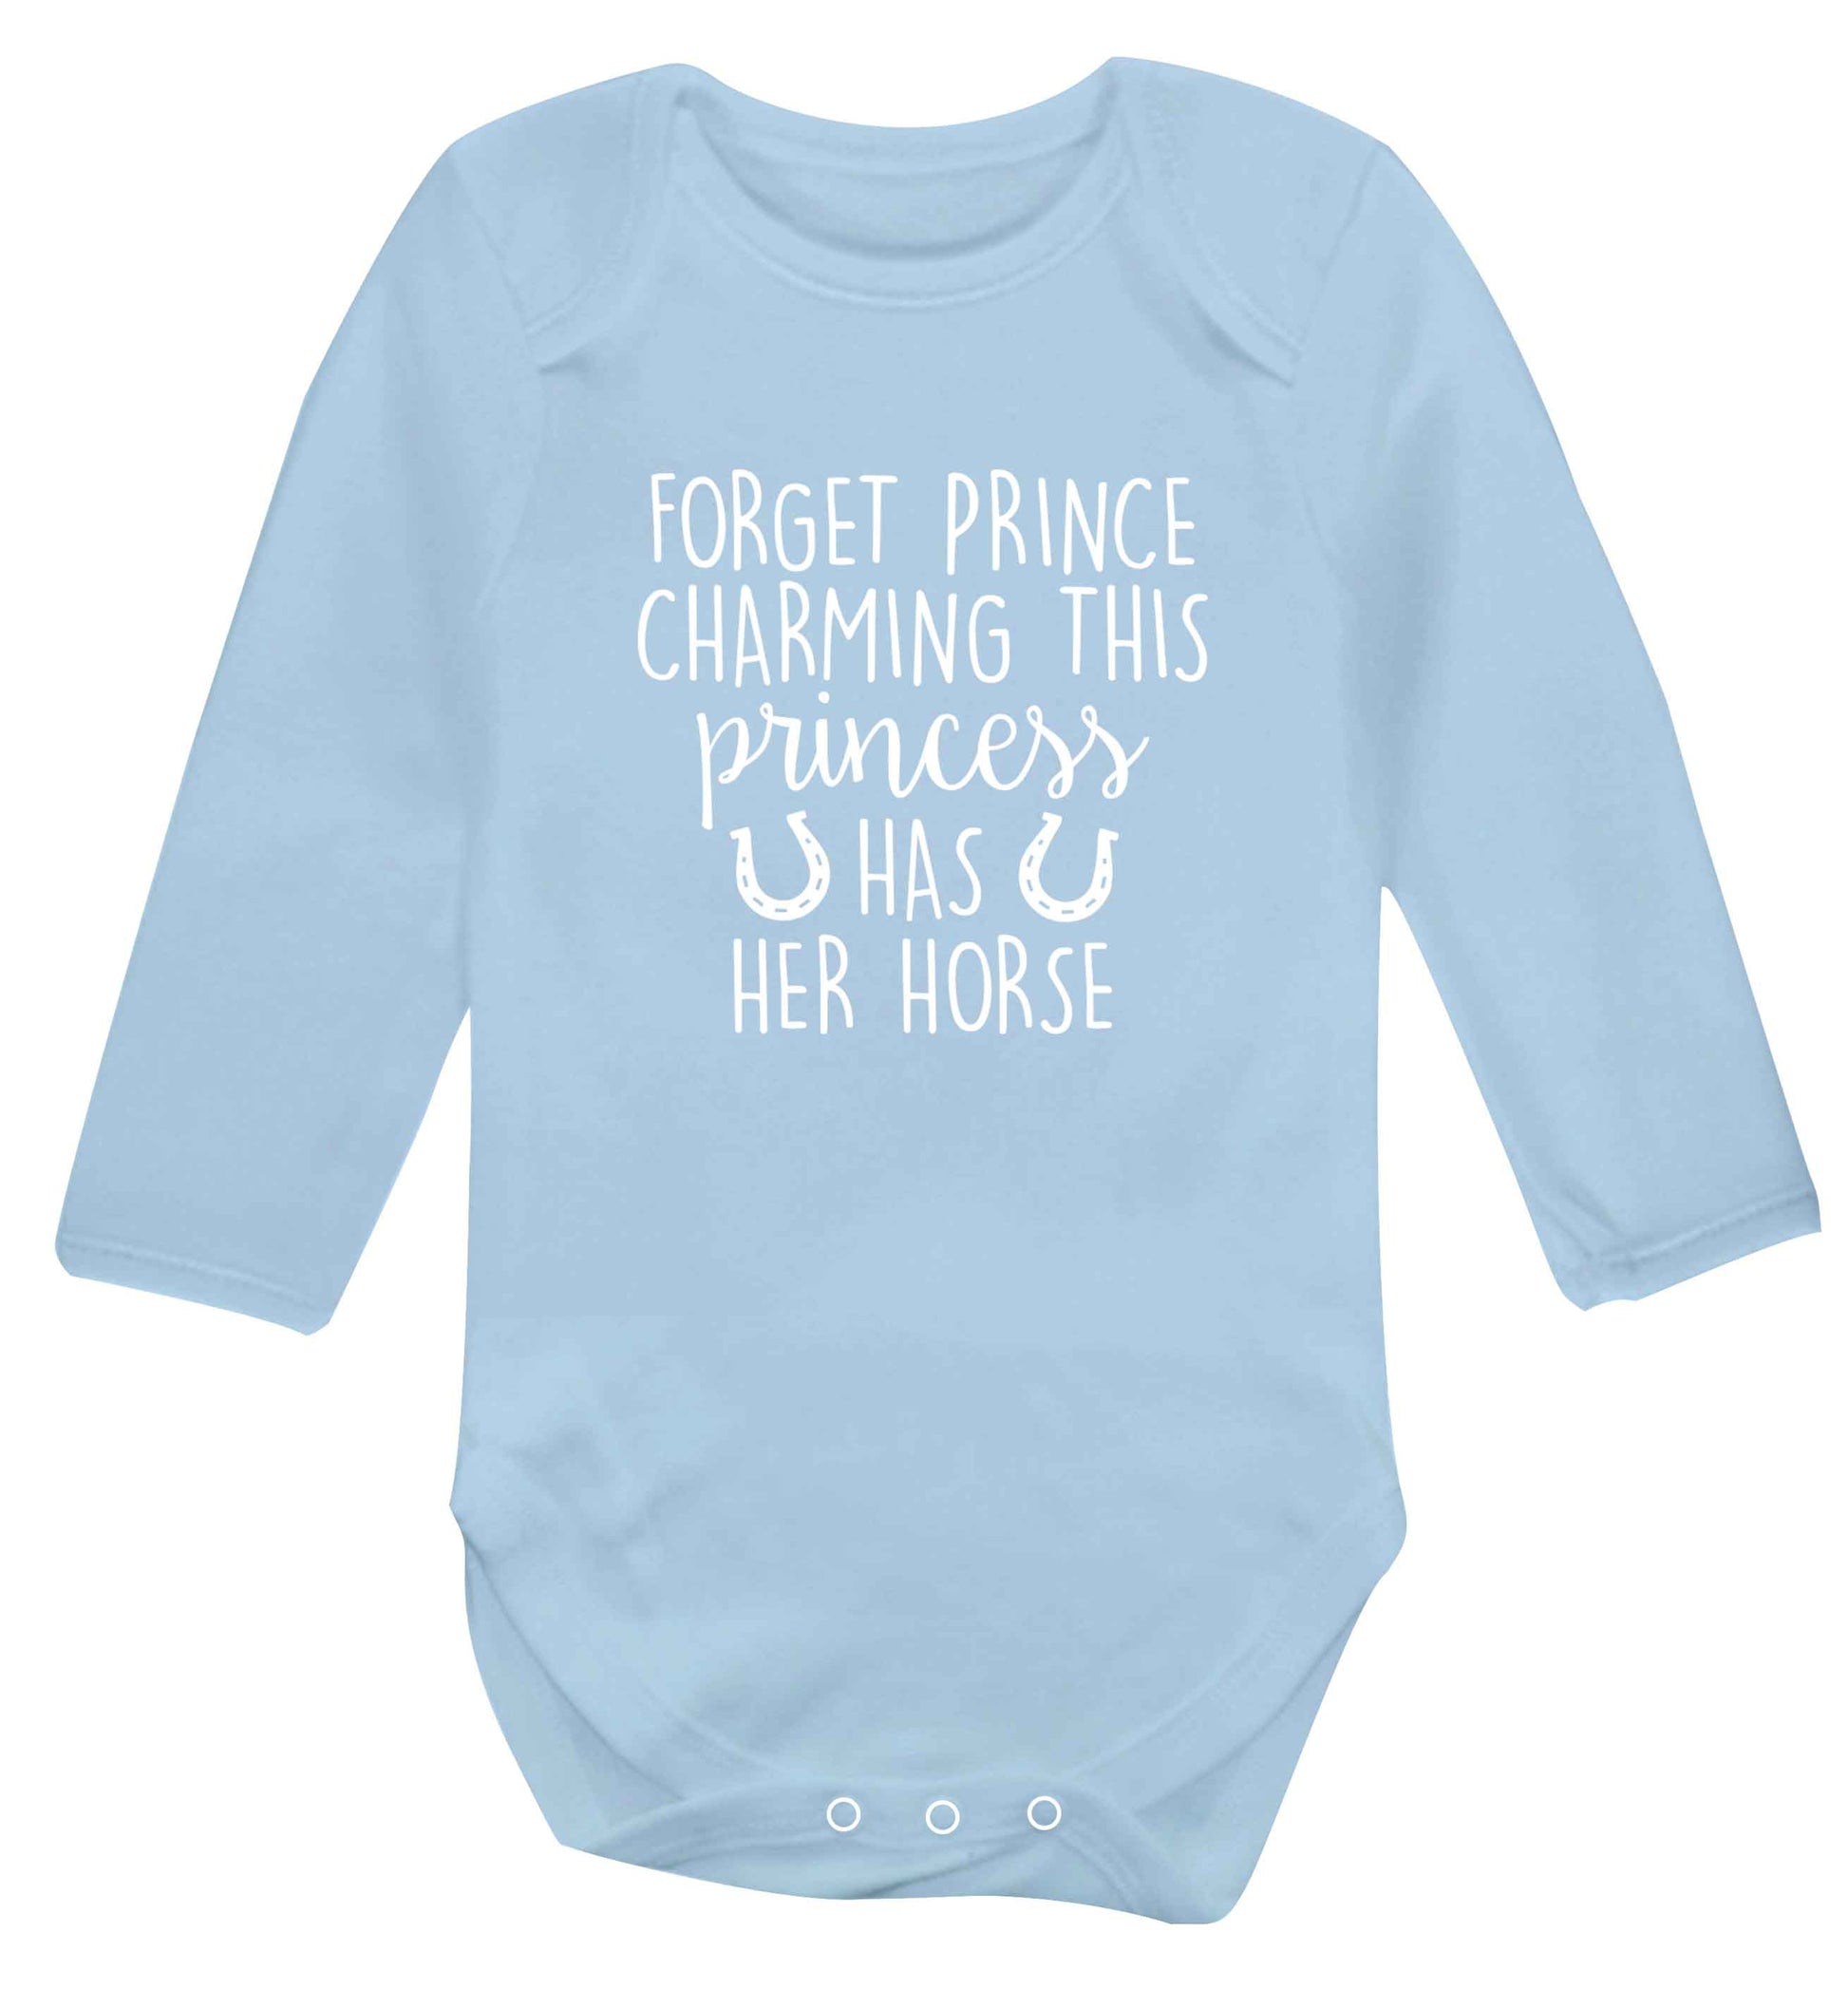 Forget prince charming this princess has her horse baby vest long sleeved pale blue 6-12 months